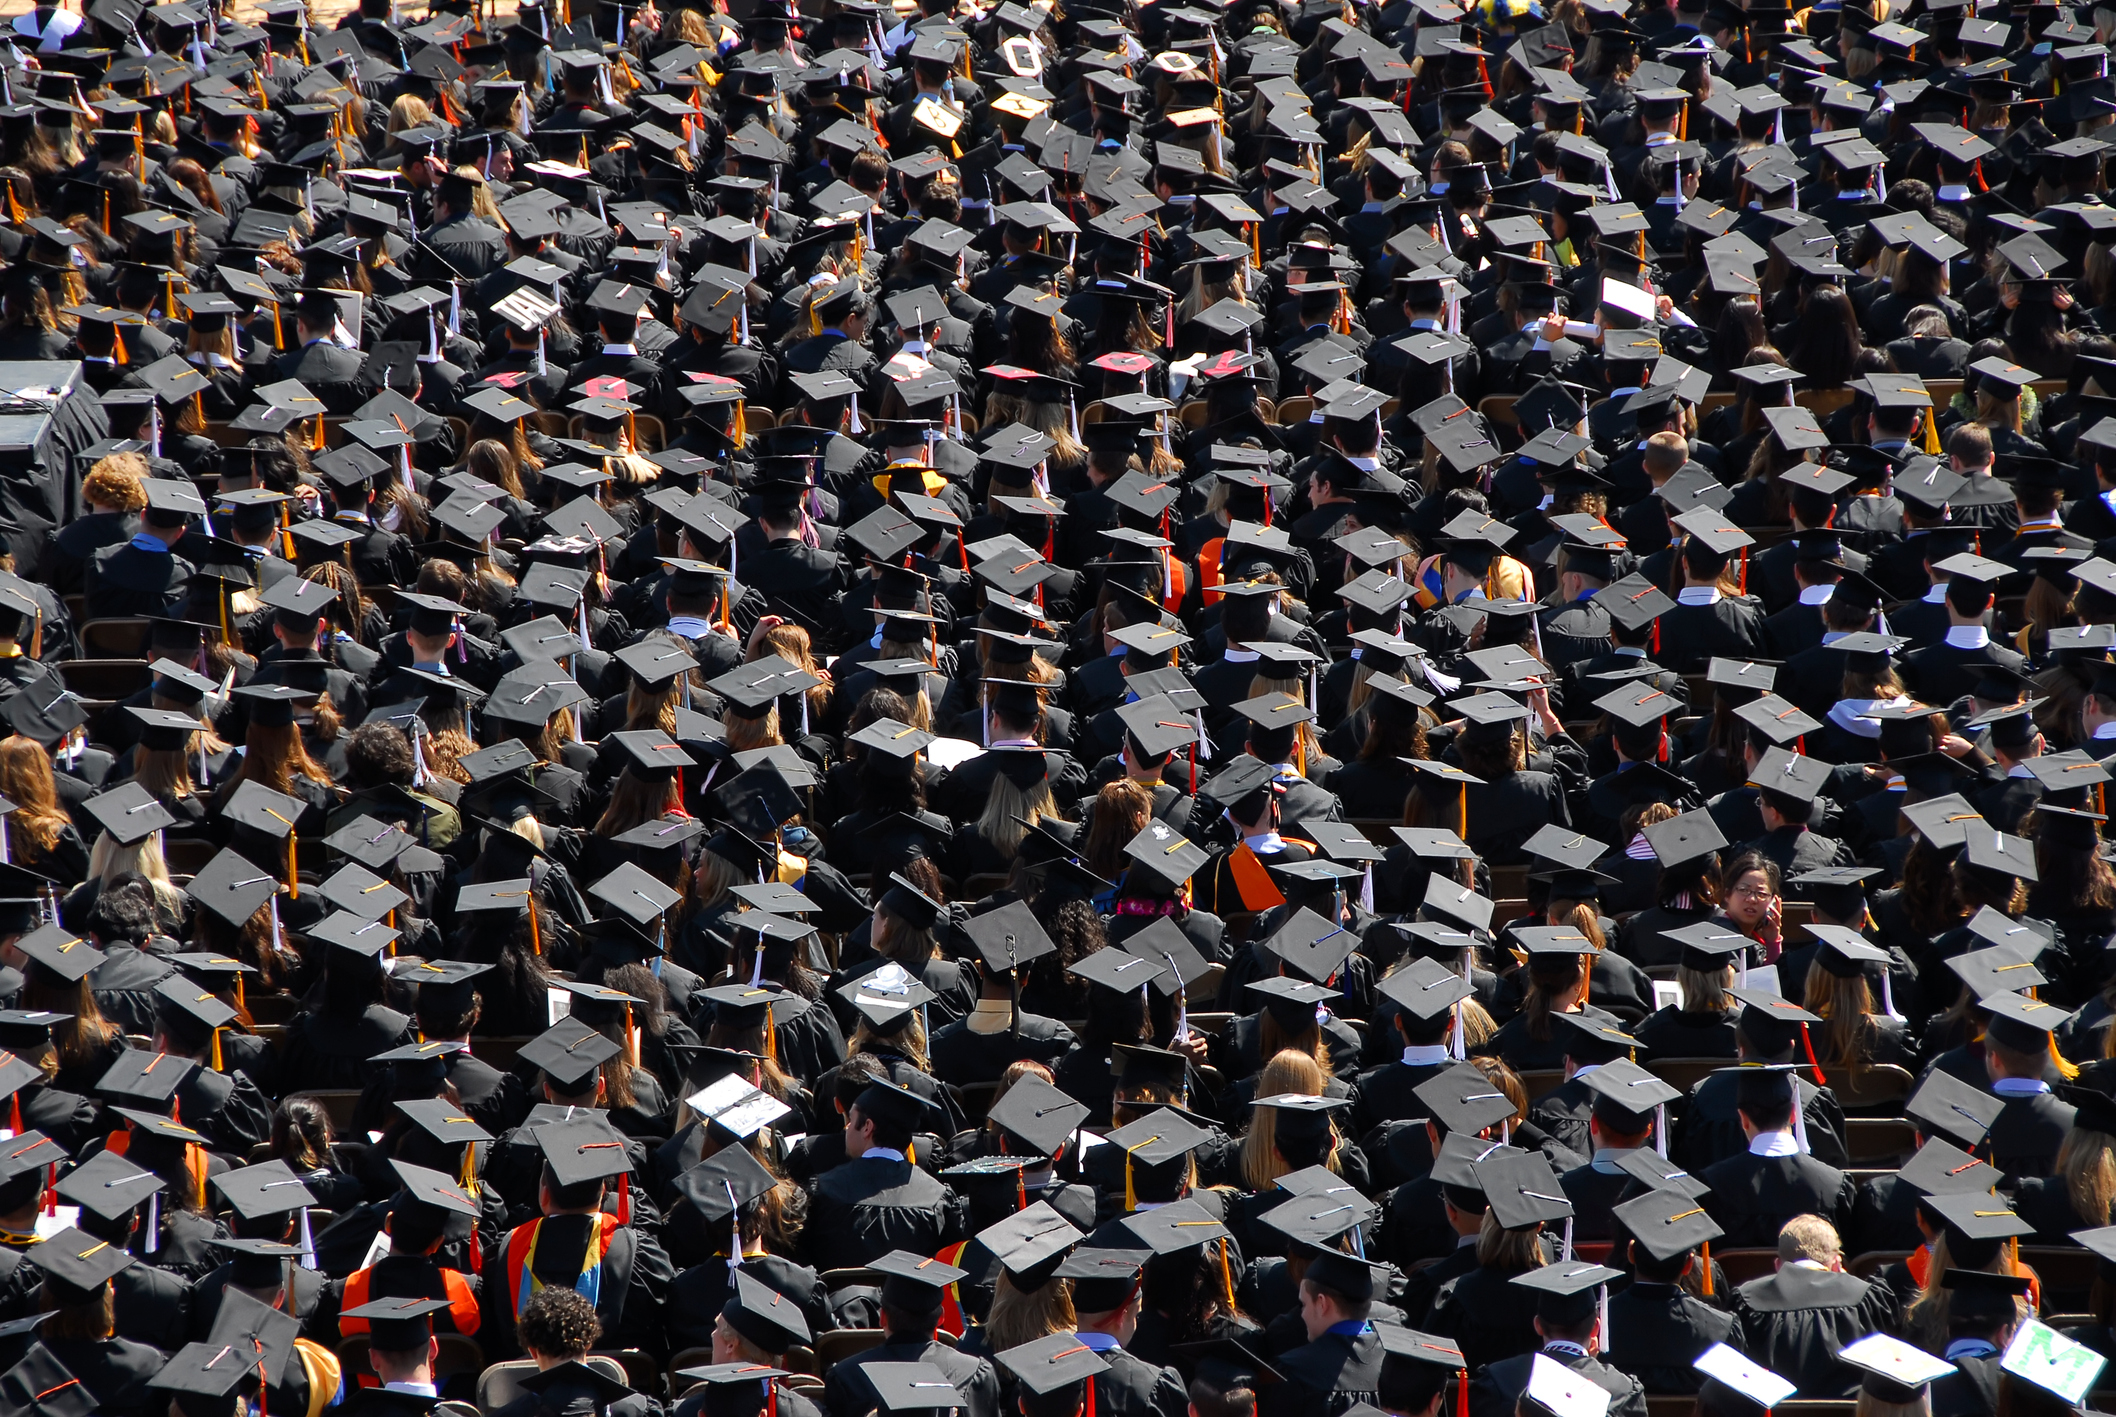 At the 2007 Spring Commencement, Ann Arbor, University of Michigan, USA. (Kevin Lau Photography—Getty Images)